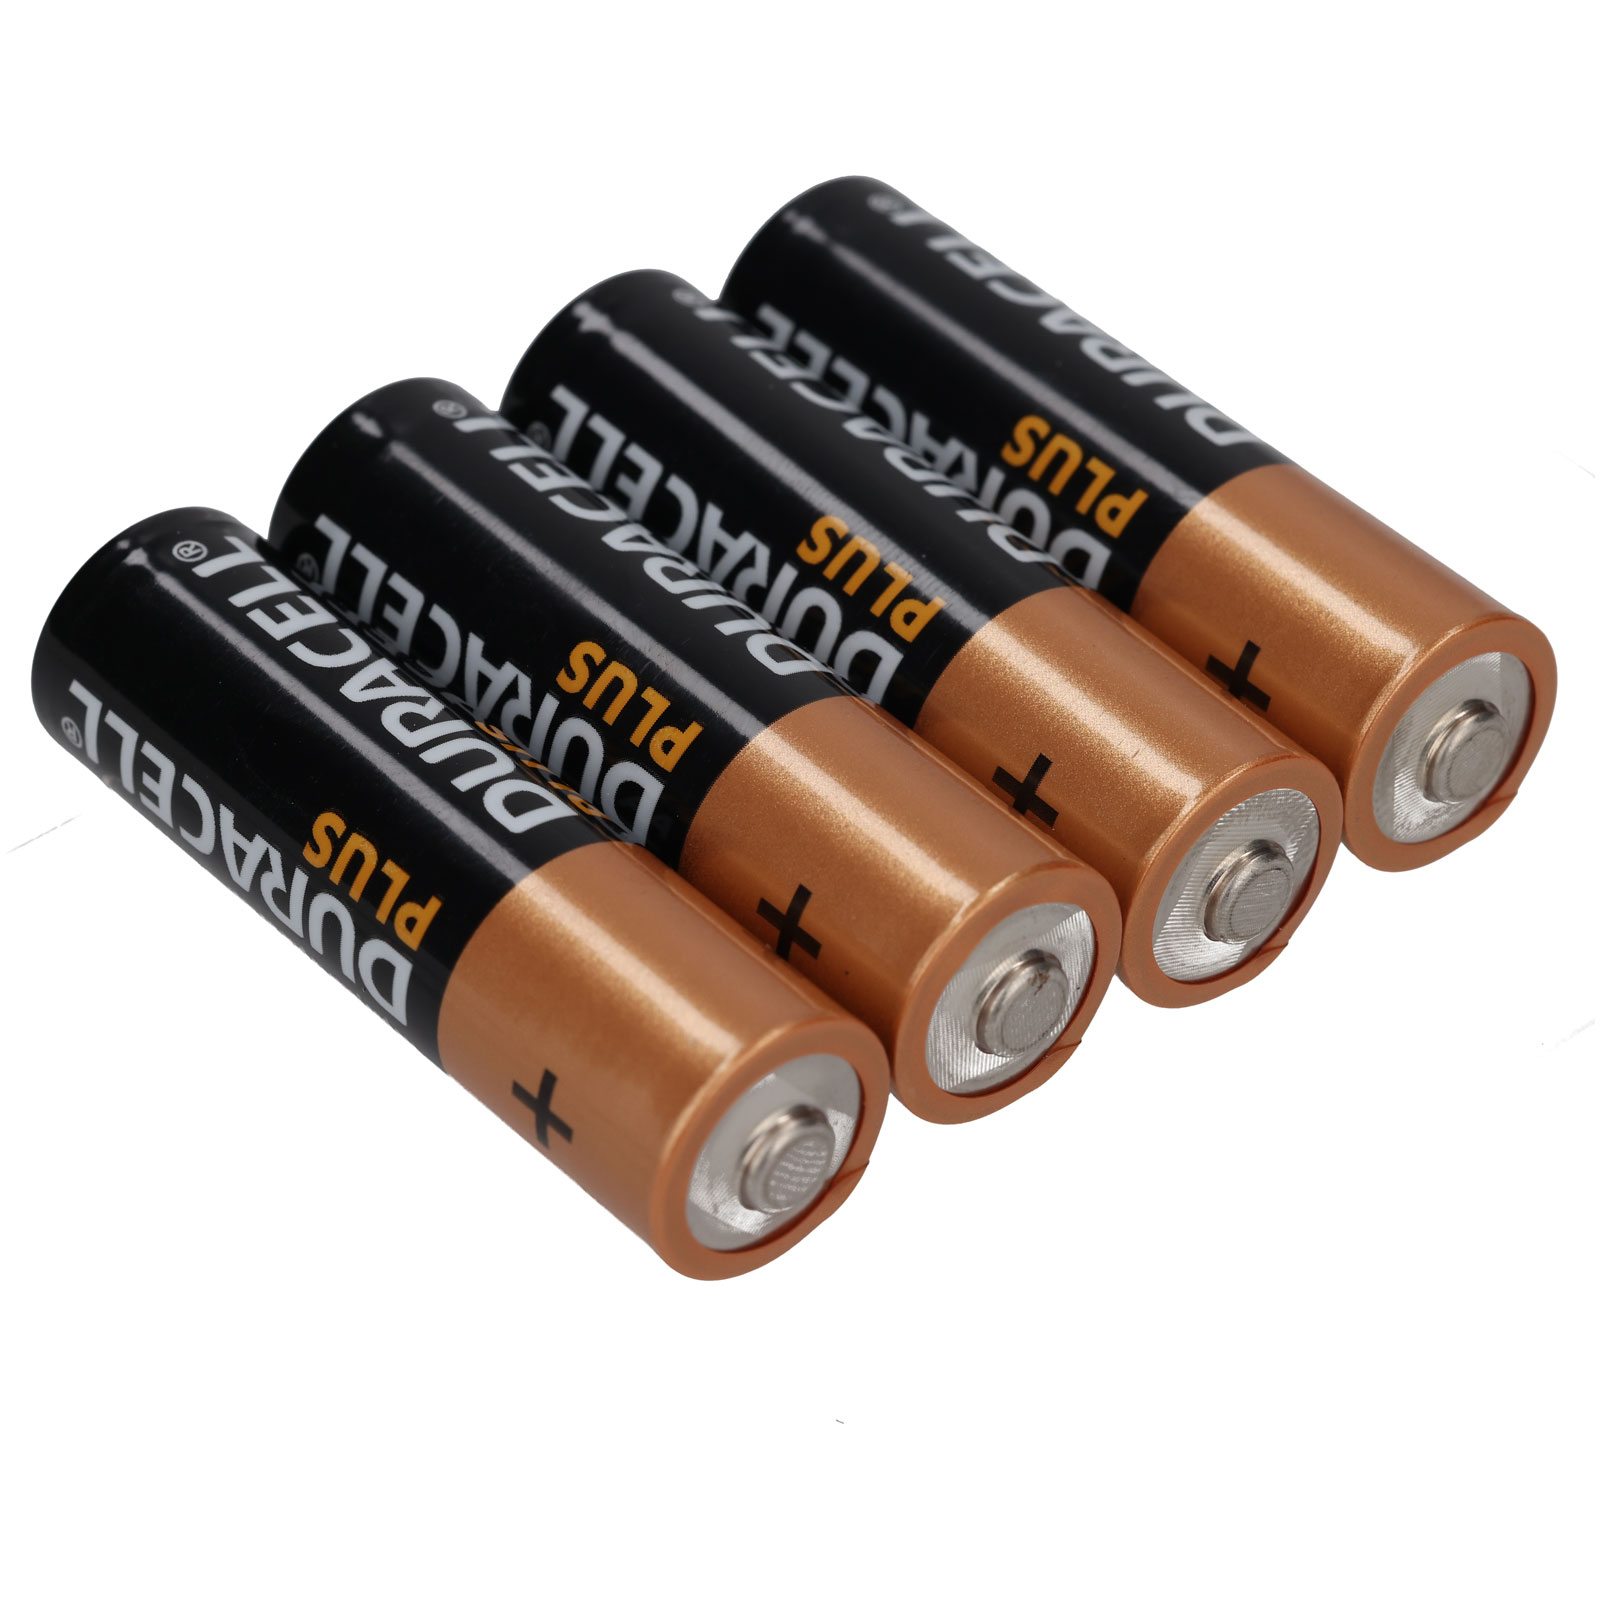 Mn 1500 Duracell AA Ultra Alkaline Battery at Rs 28.75/piece in